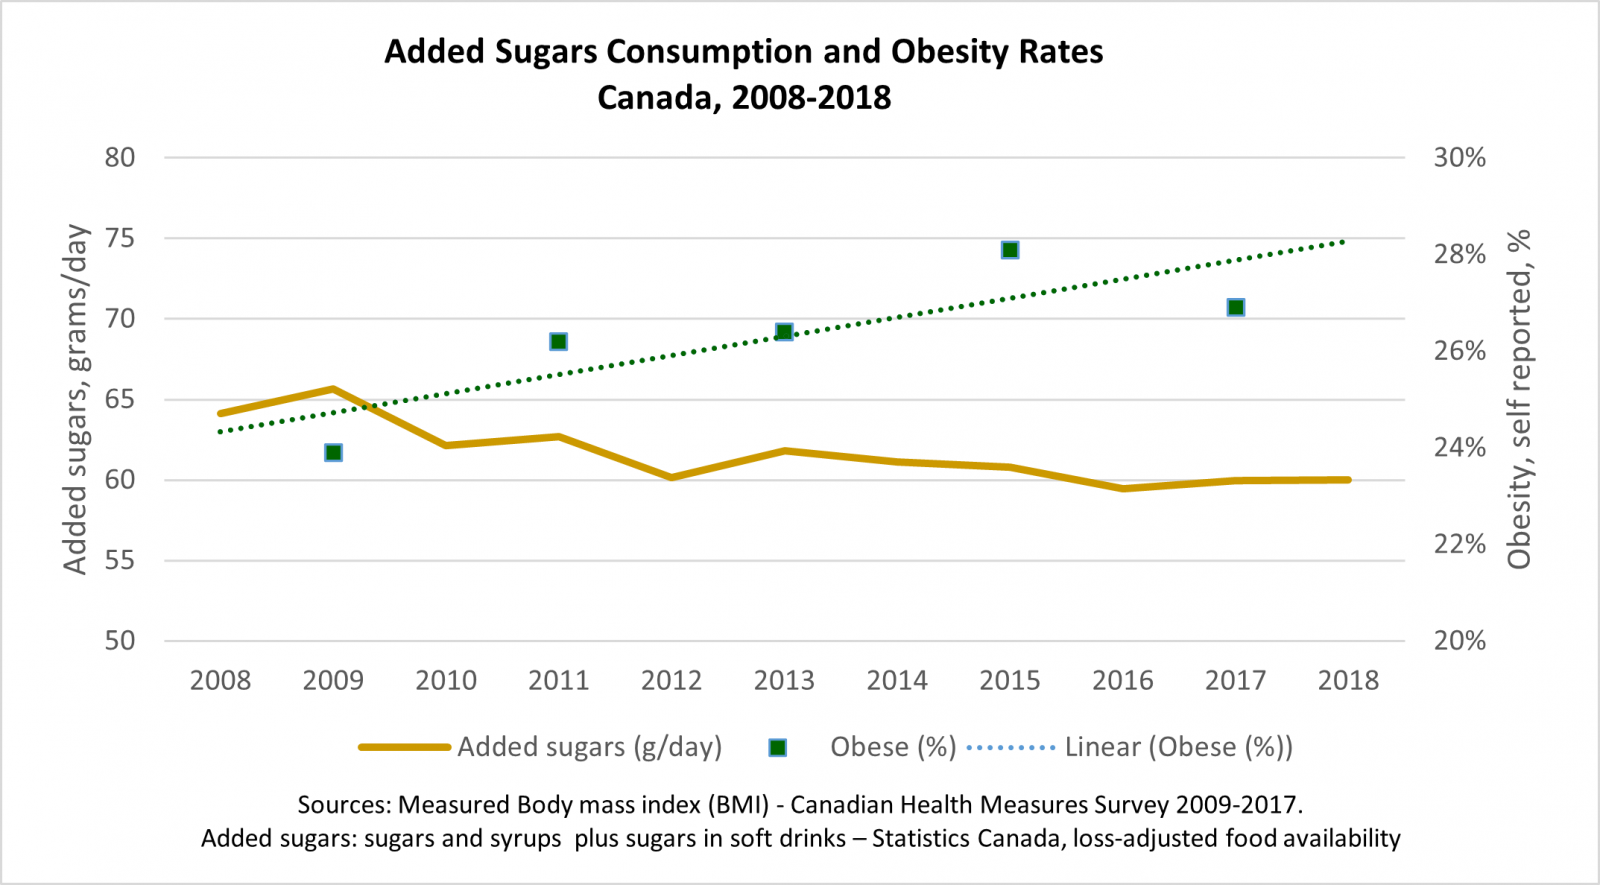 Added sugars consumption has been falling while obesity rates rise in Canada